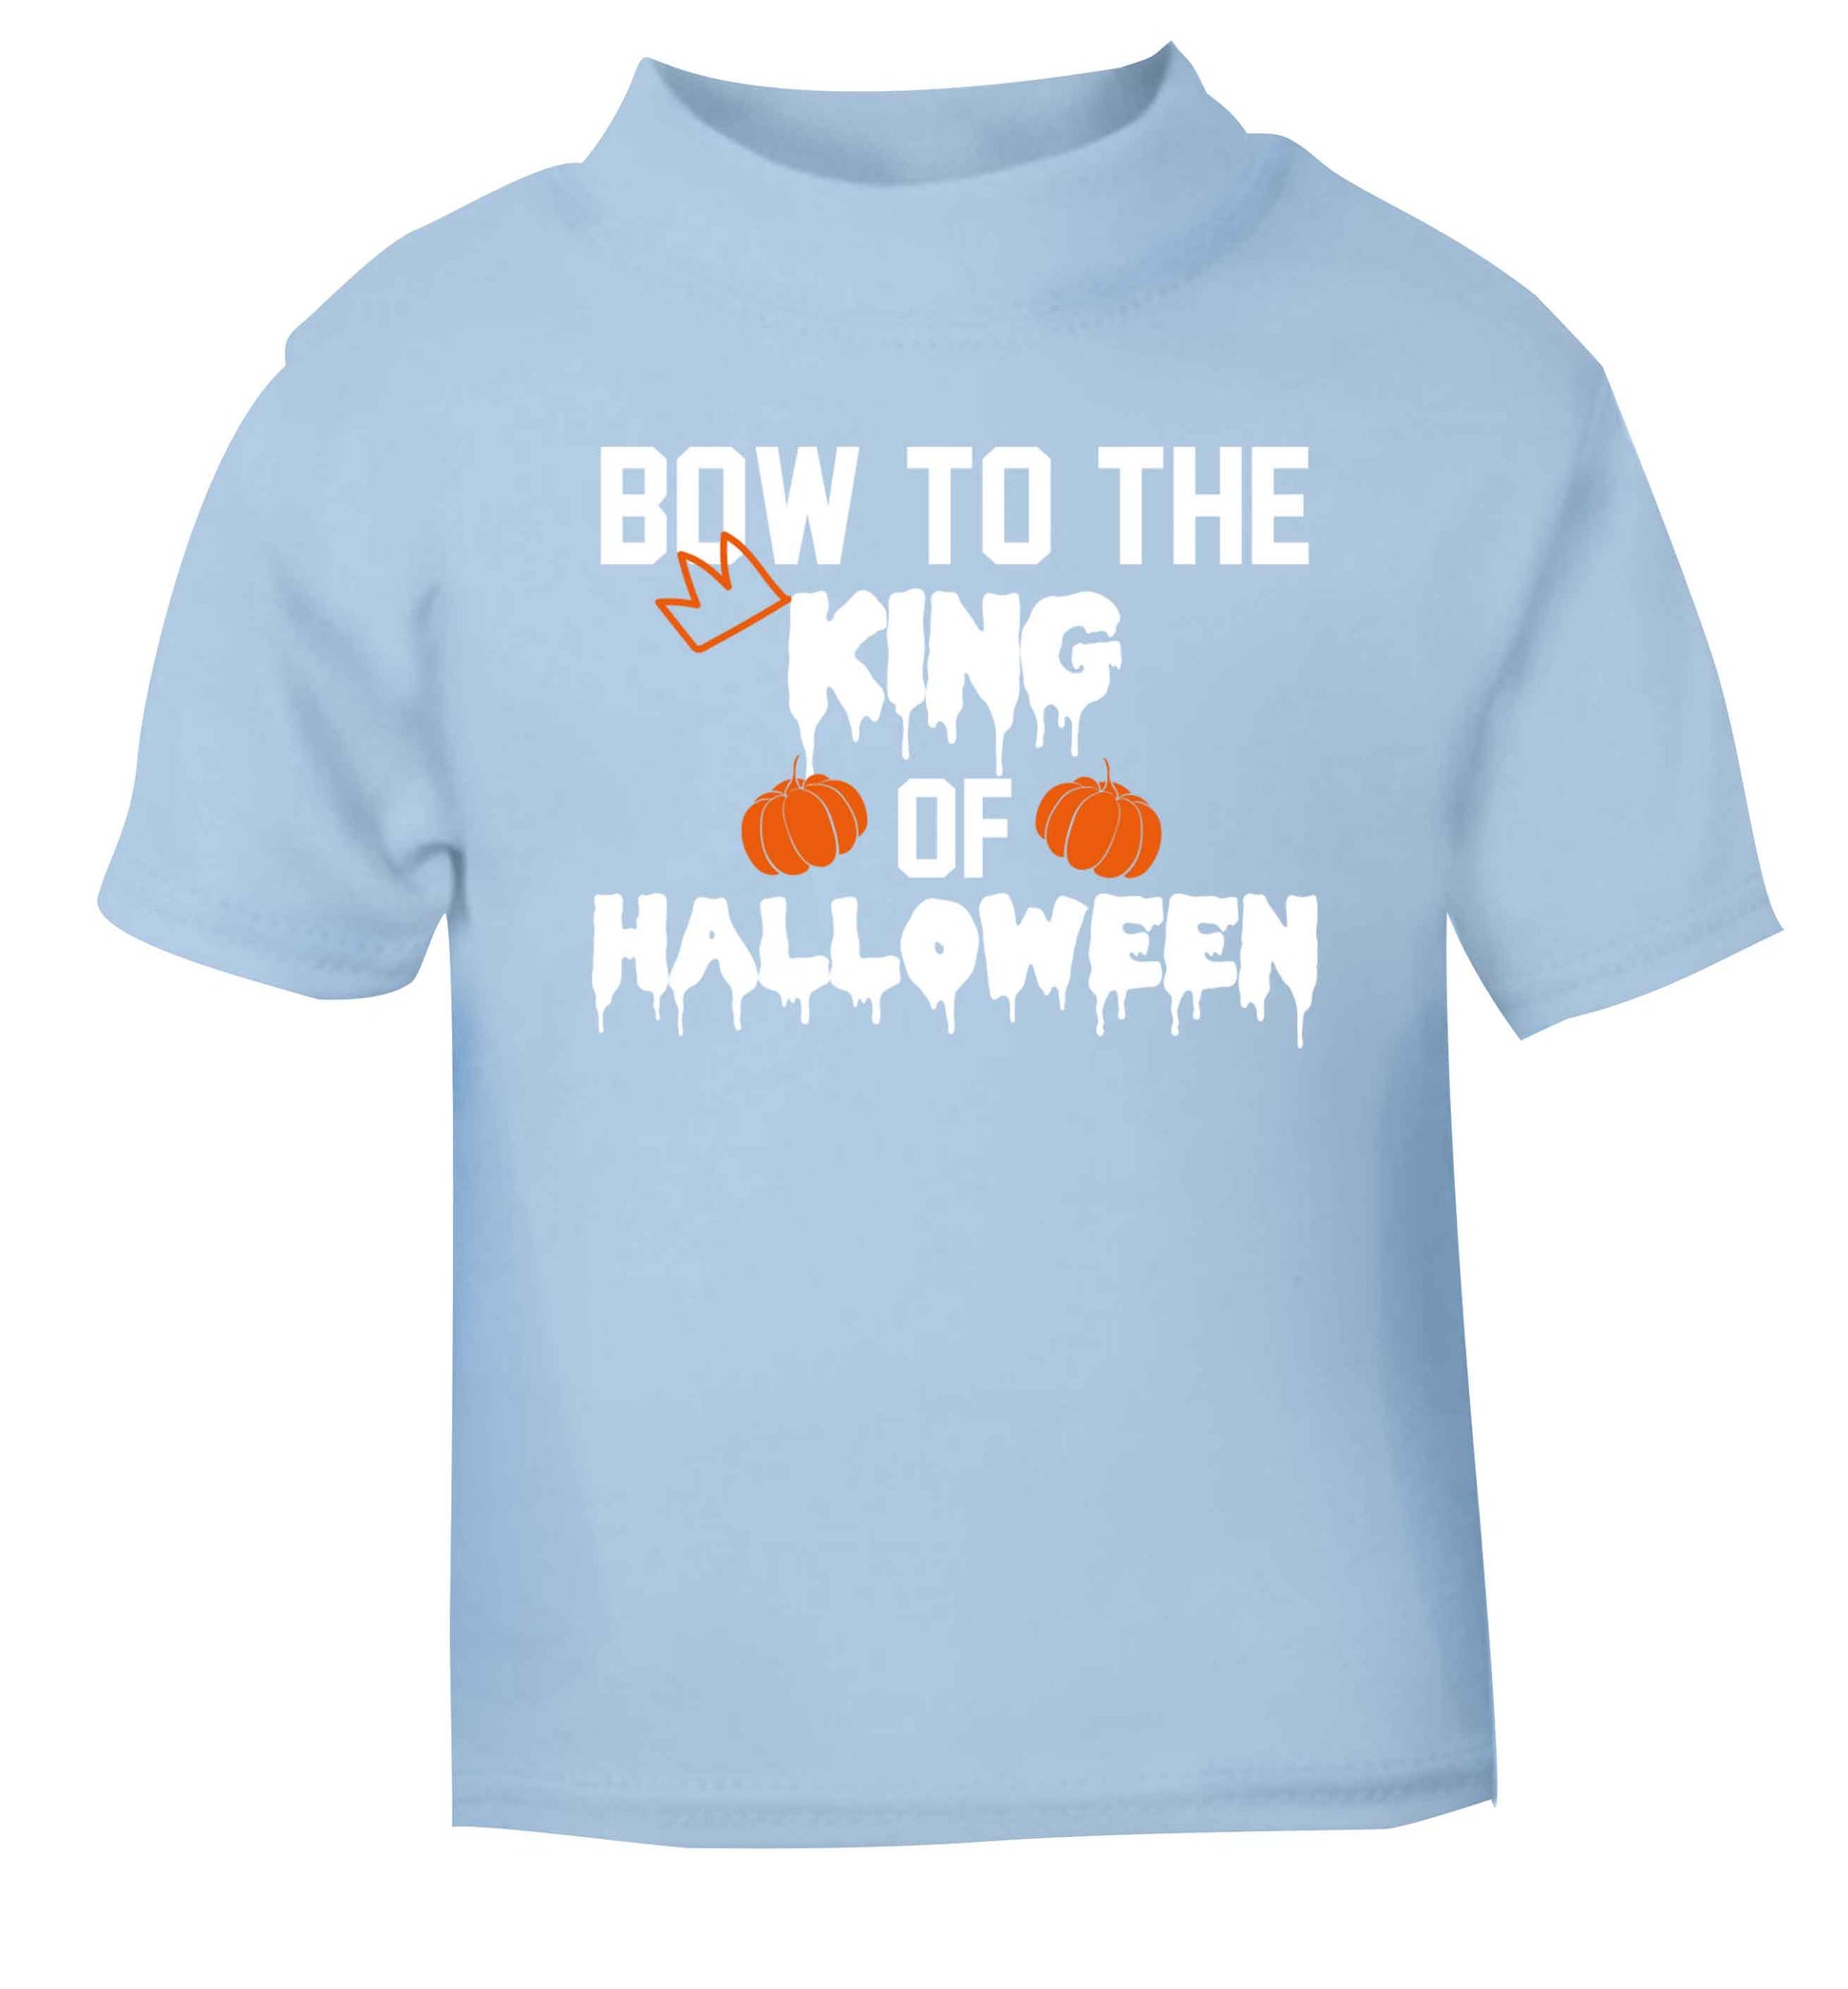 Bow to the King of halloween light blue baby toddler Tshirt 2 Years